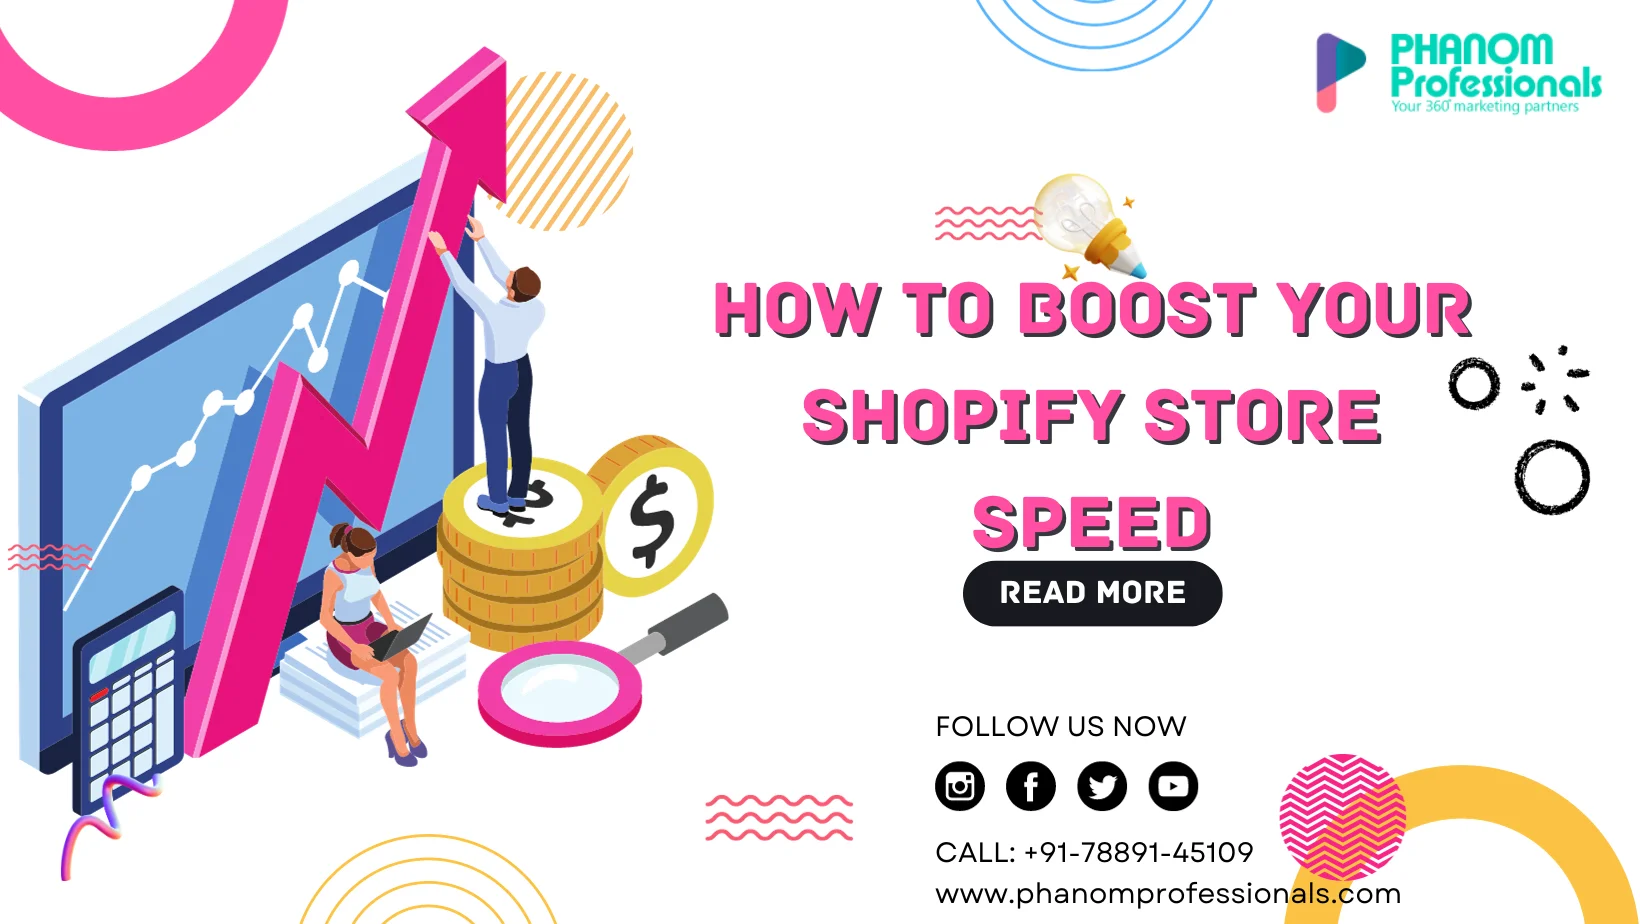 Boost your shopify store speed. Hire best shopify developer 